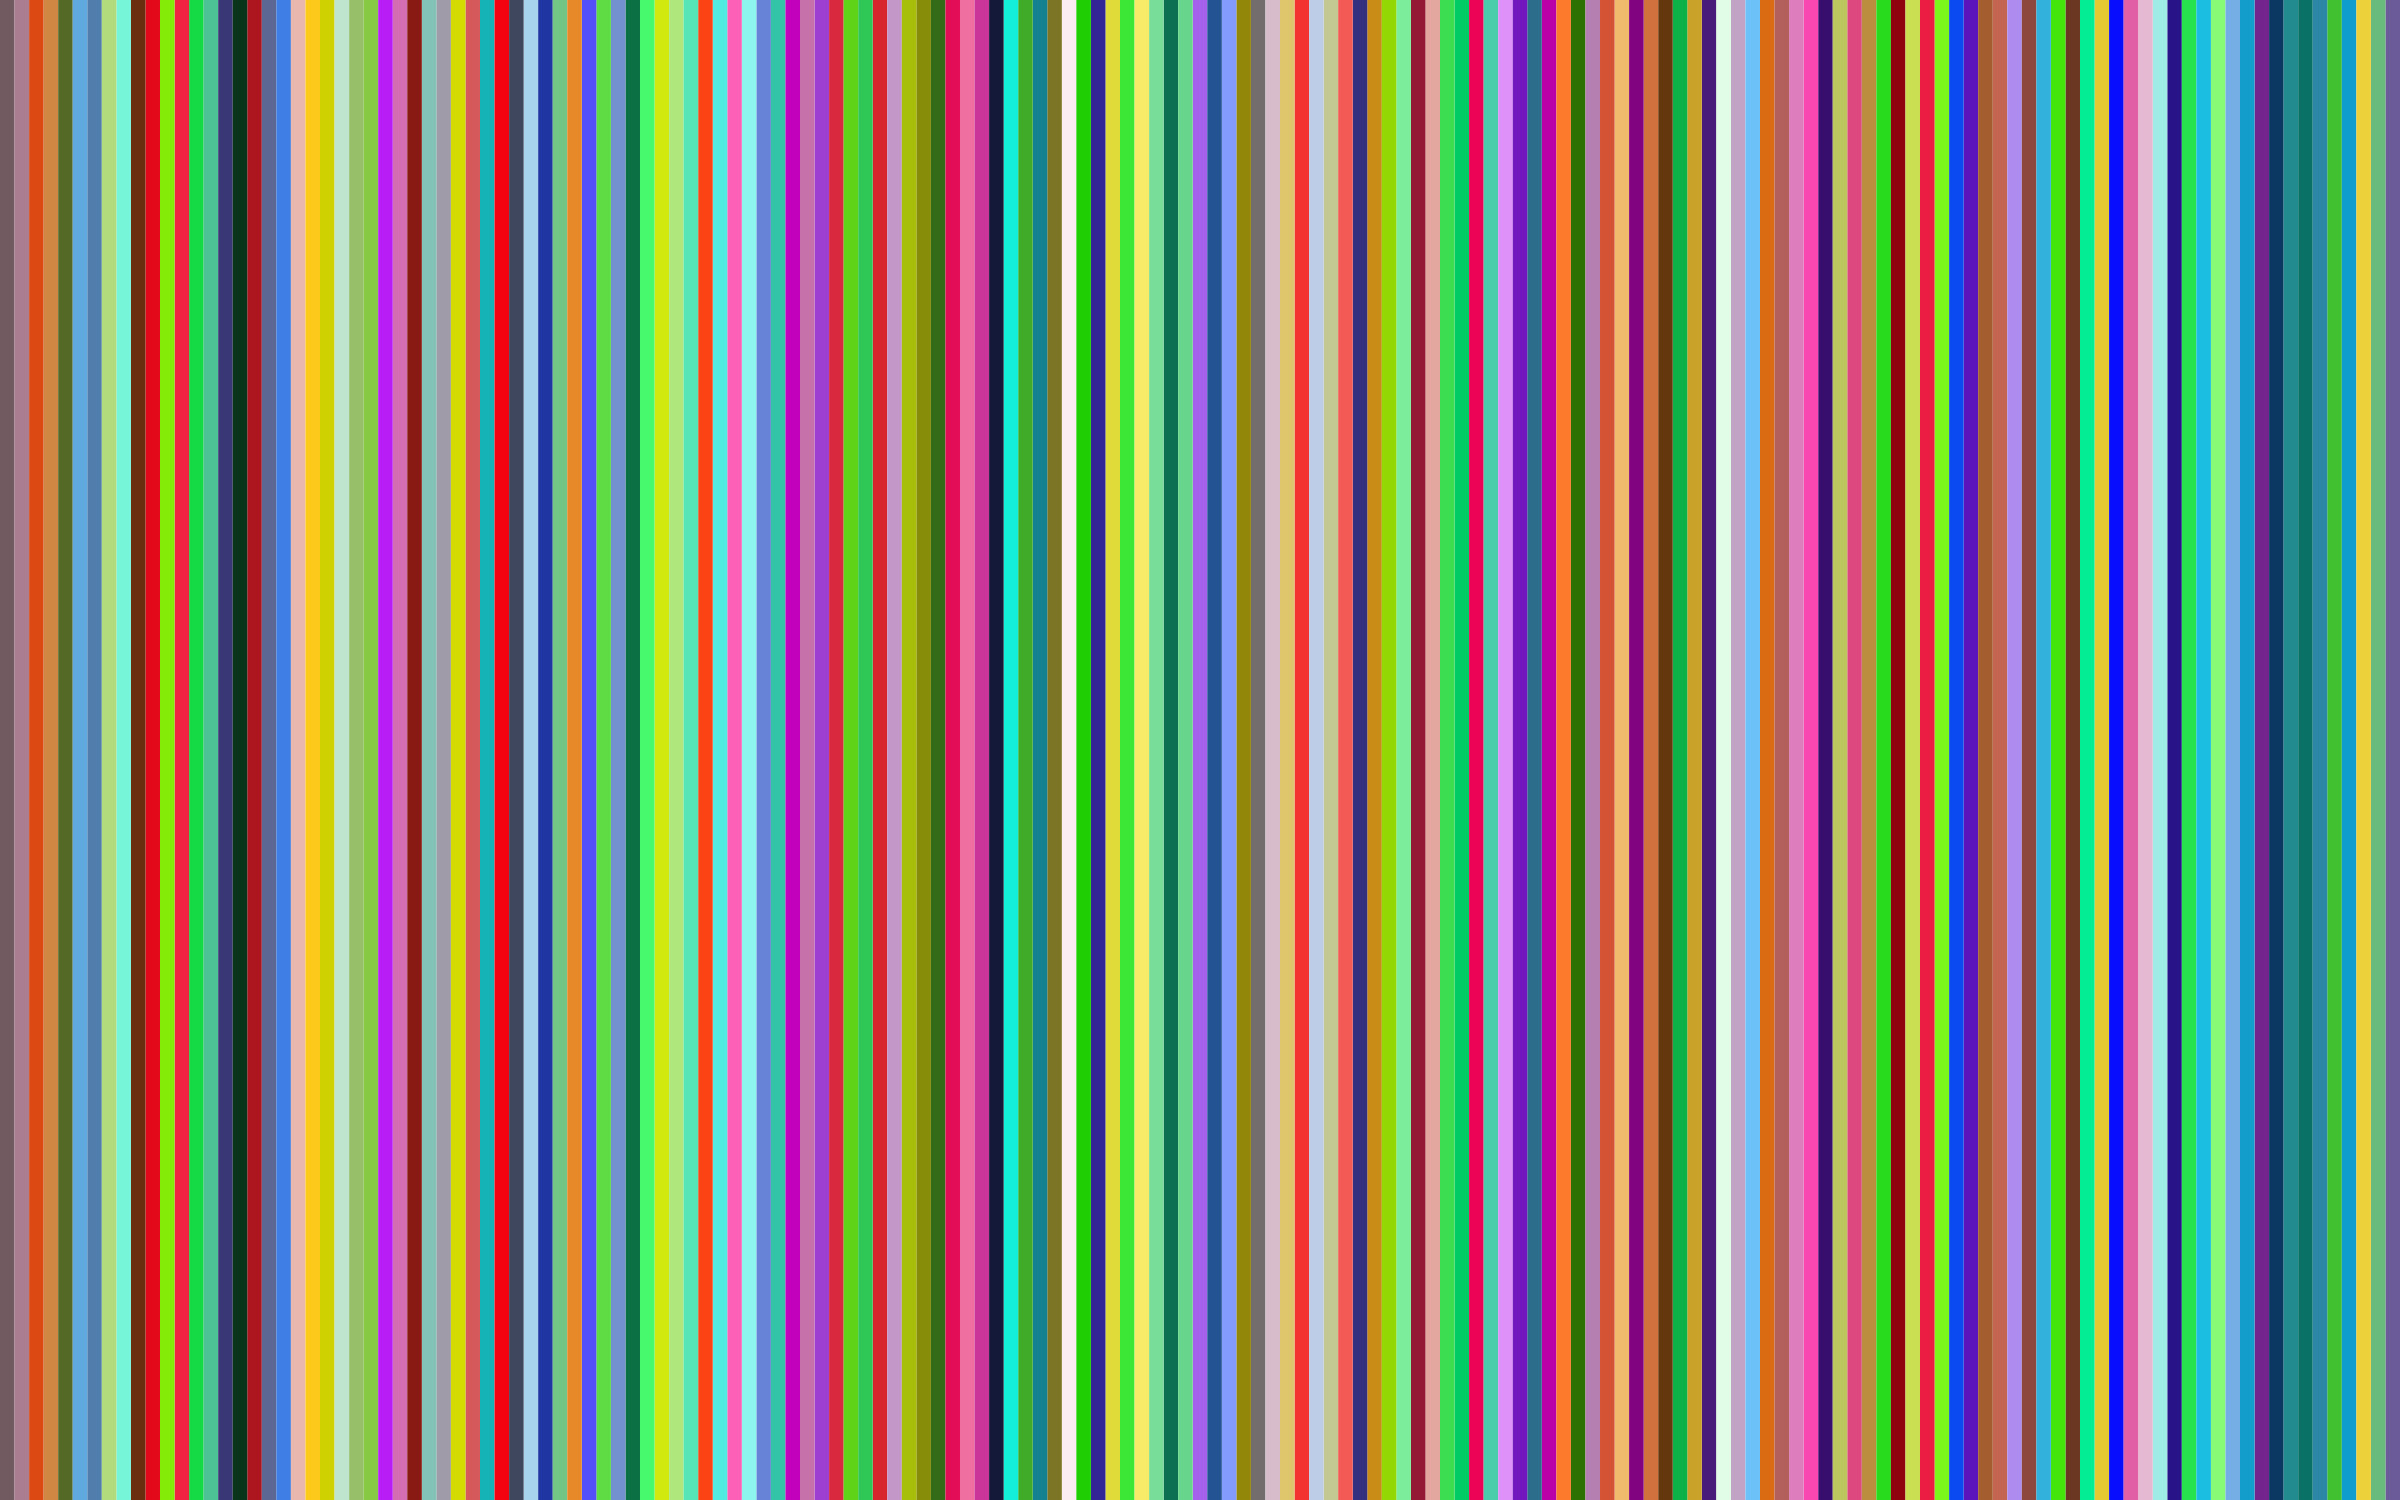 2400x1500 Colorful Striped Wallpaper - Wallpapers Browse ...